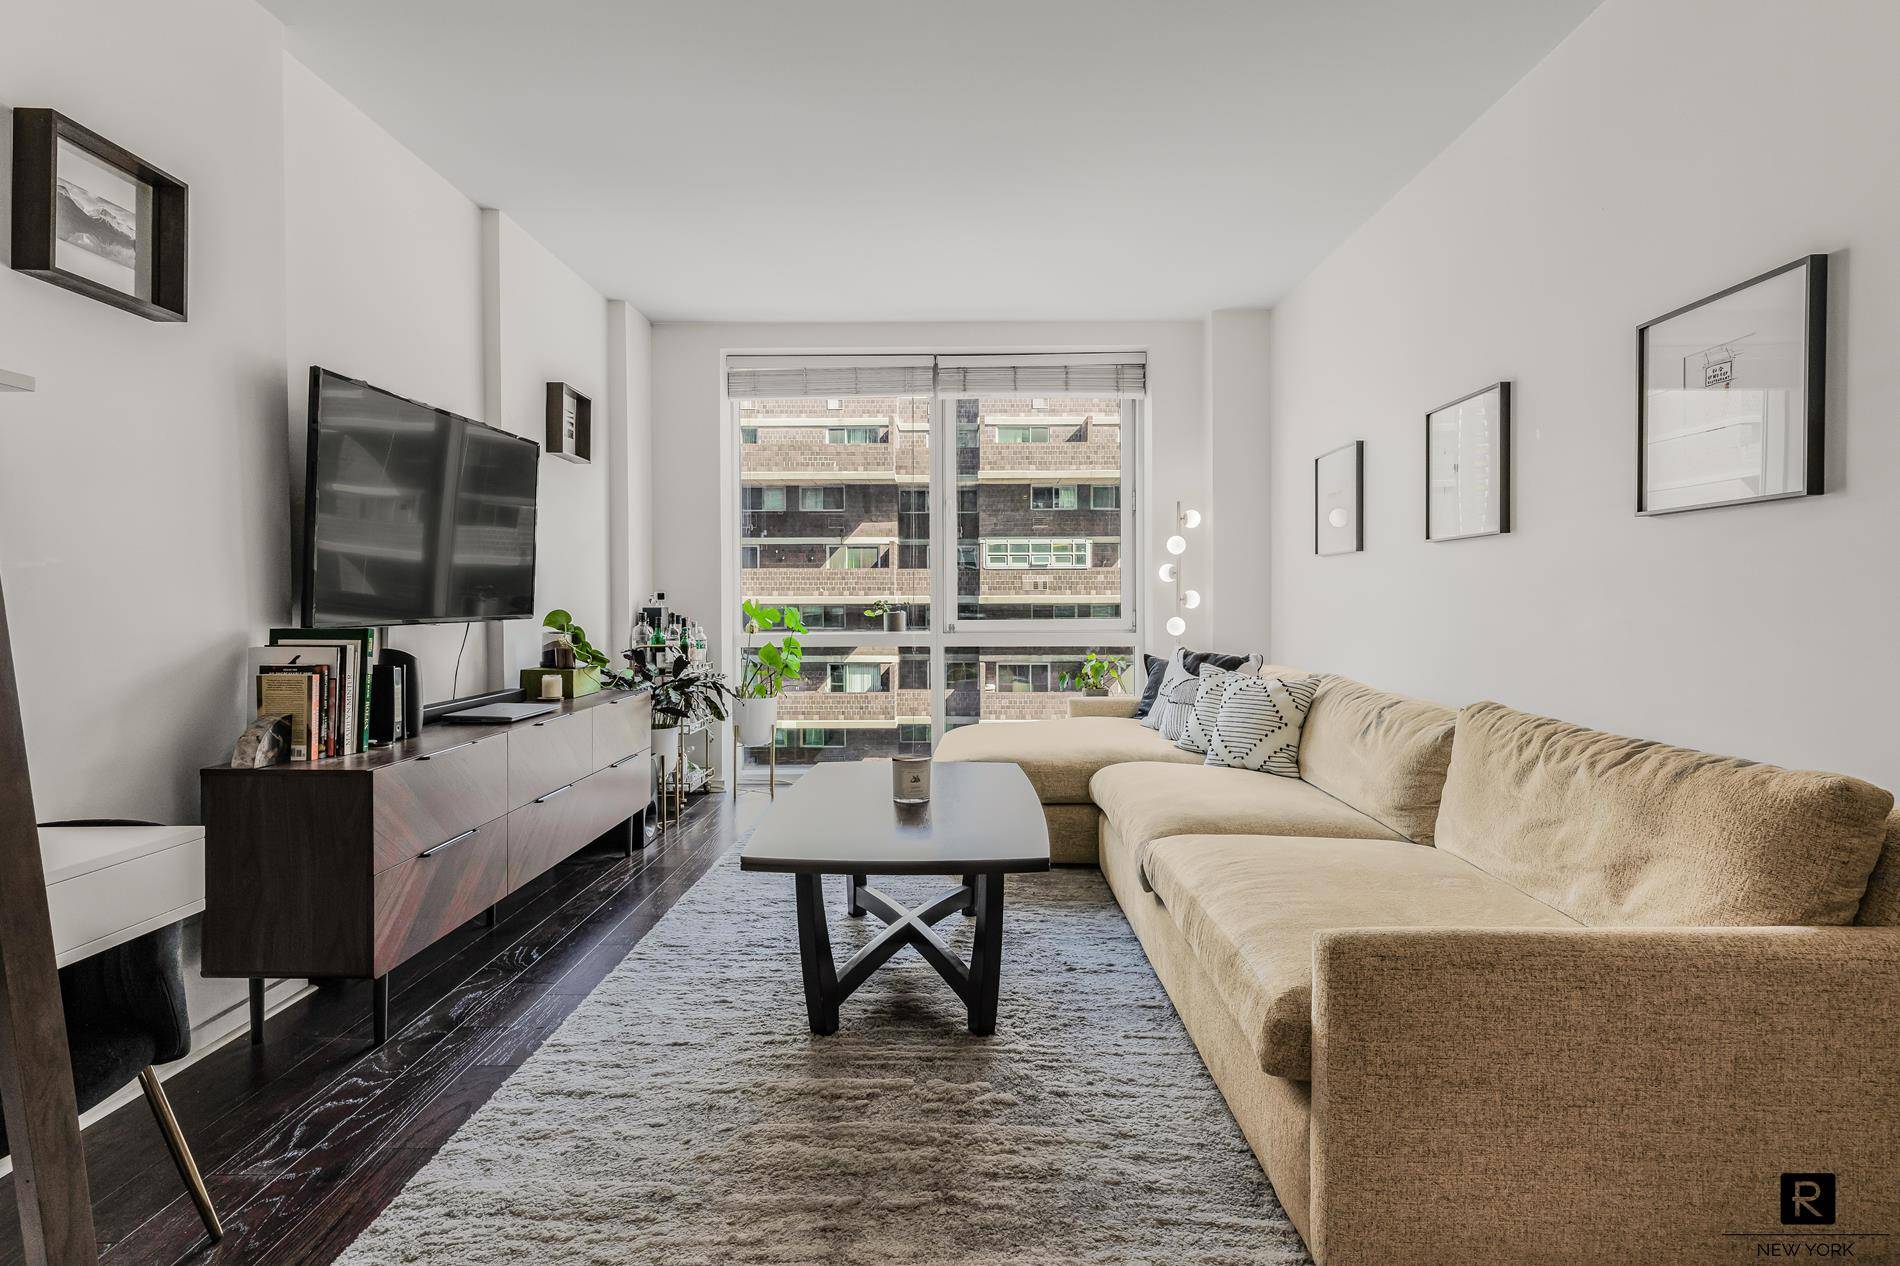 Welcome to Gramercy Starck, a modern, sun filled, well appointed one bedroom conveniently located in one of the best condominiums in Gramercy.